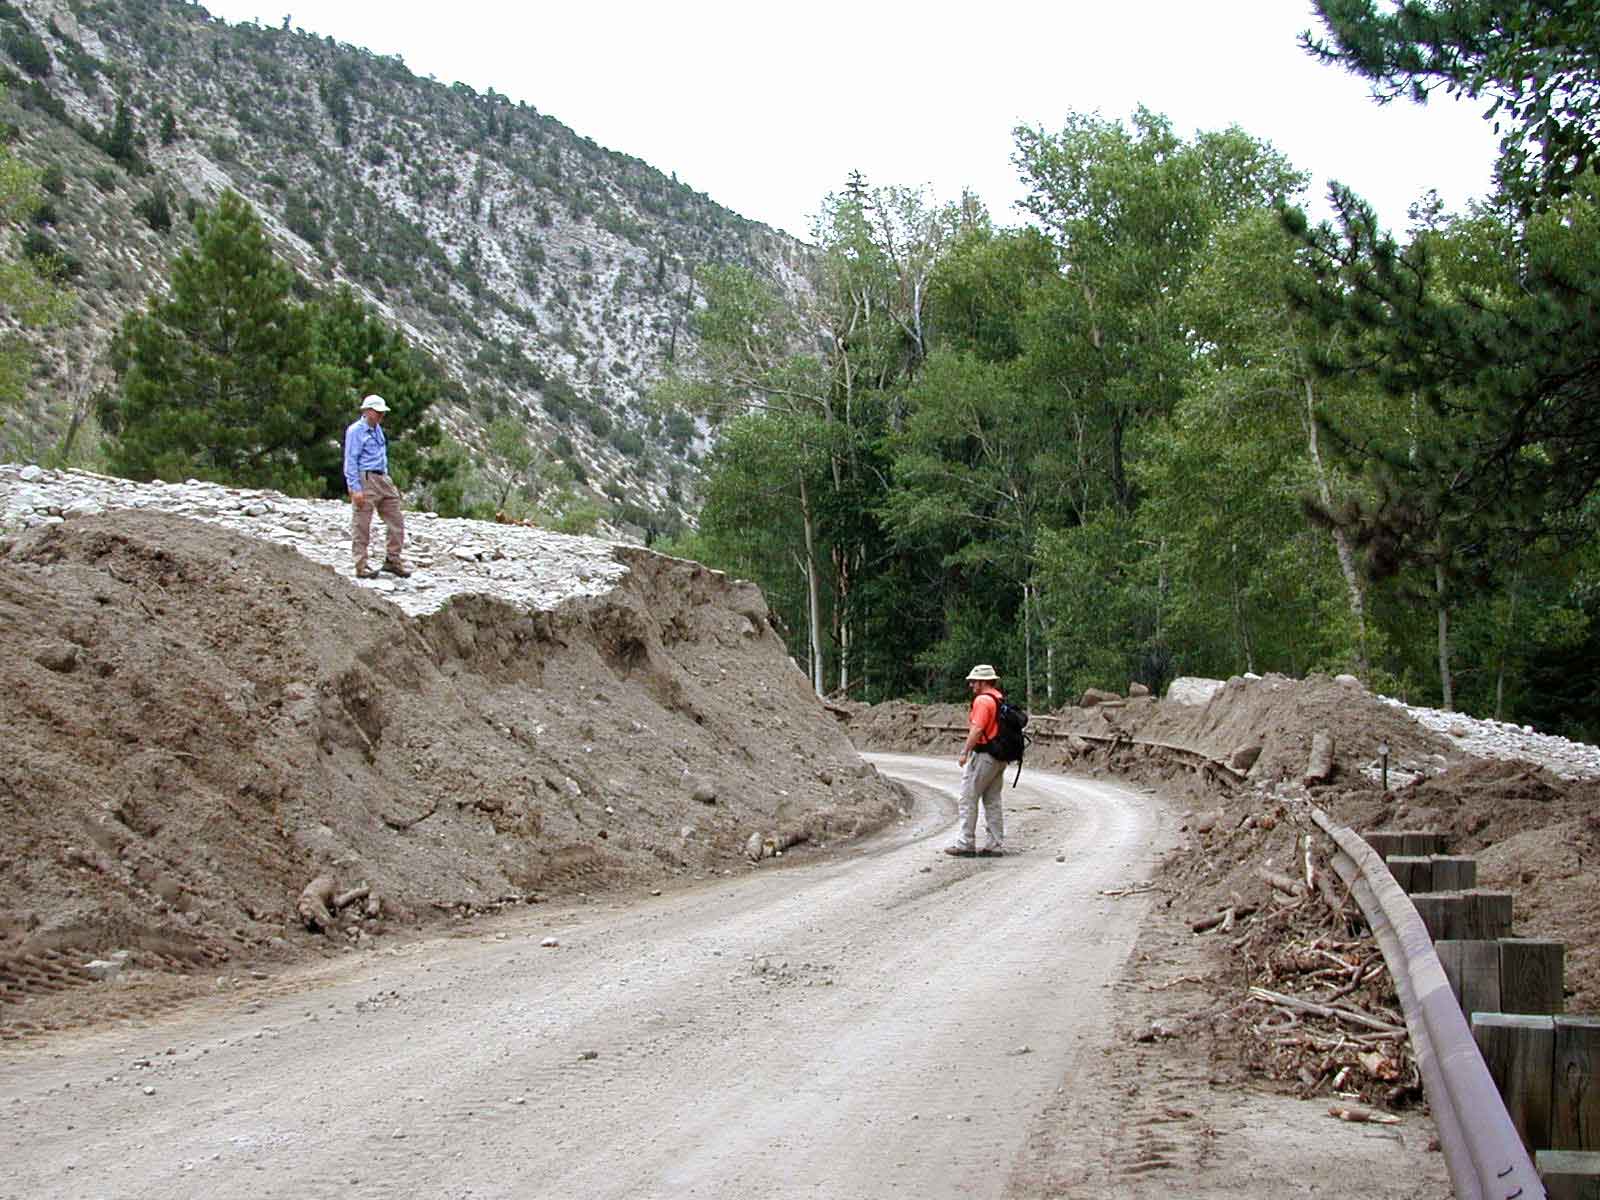 Photograph showing a debris flow that had covered a road before it was re-excavated.